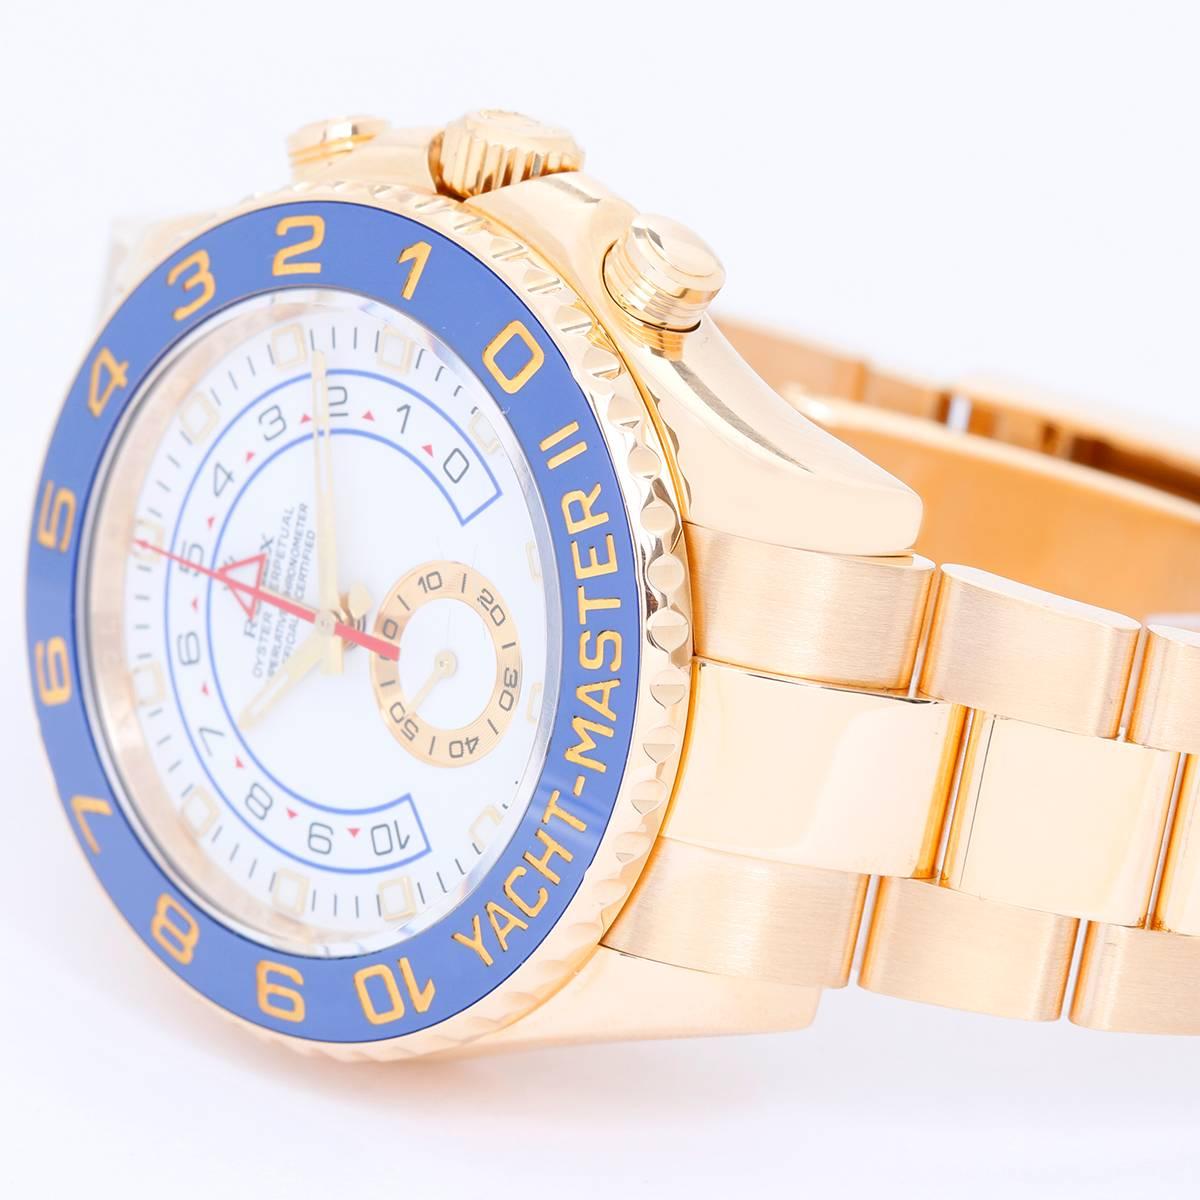 Men's Rolex Yacht-Master II Regatta 18k Yellow Gold Watch 116688 -  Automatic winding, Regatta Chronograph, 31 jewels, sapphire crystal. 18k yellow gold case with rotatable Ring Command bezel with blue insert (44mm diameter). White dial with